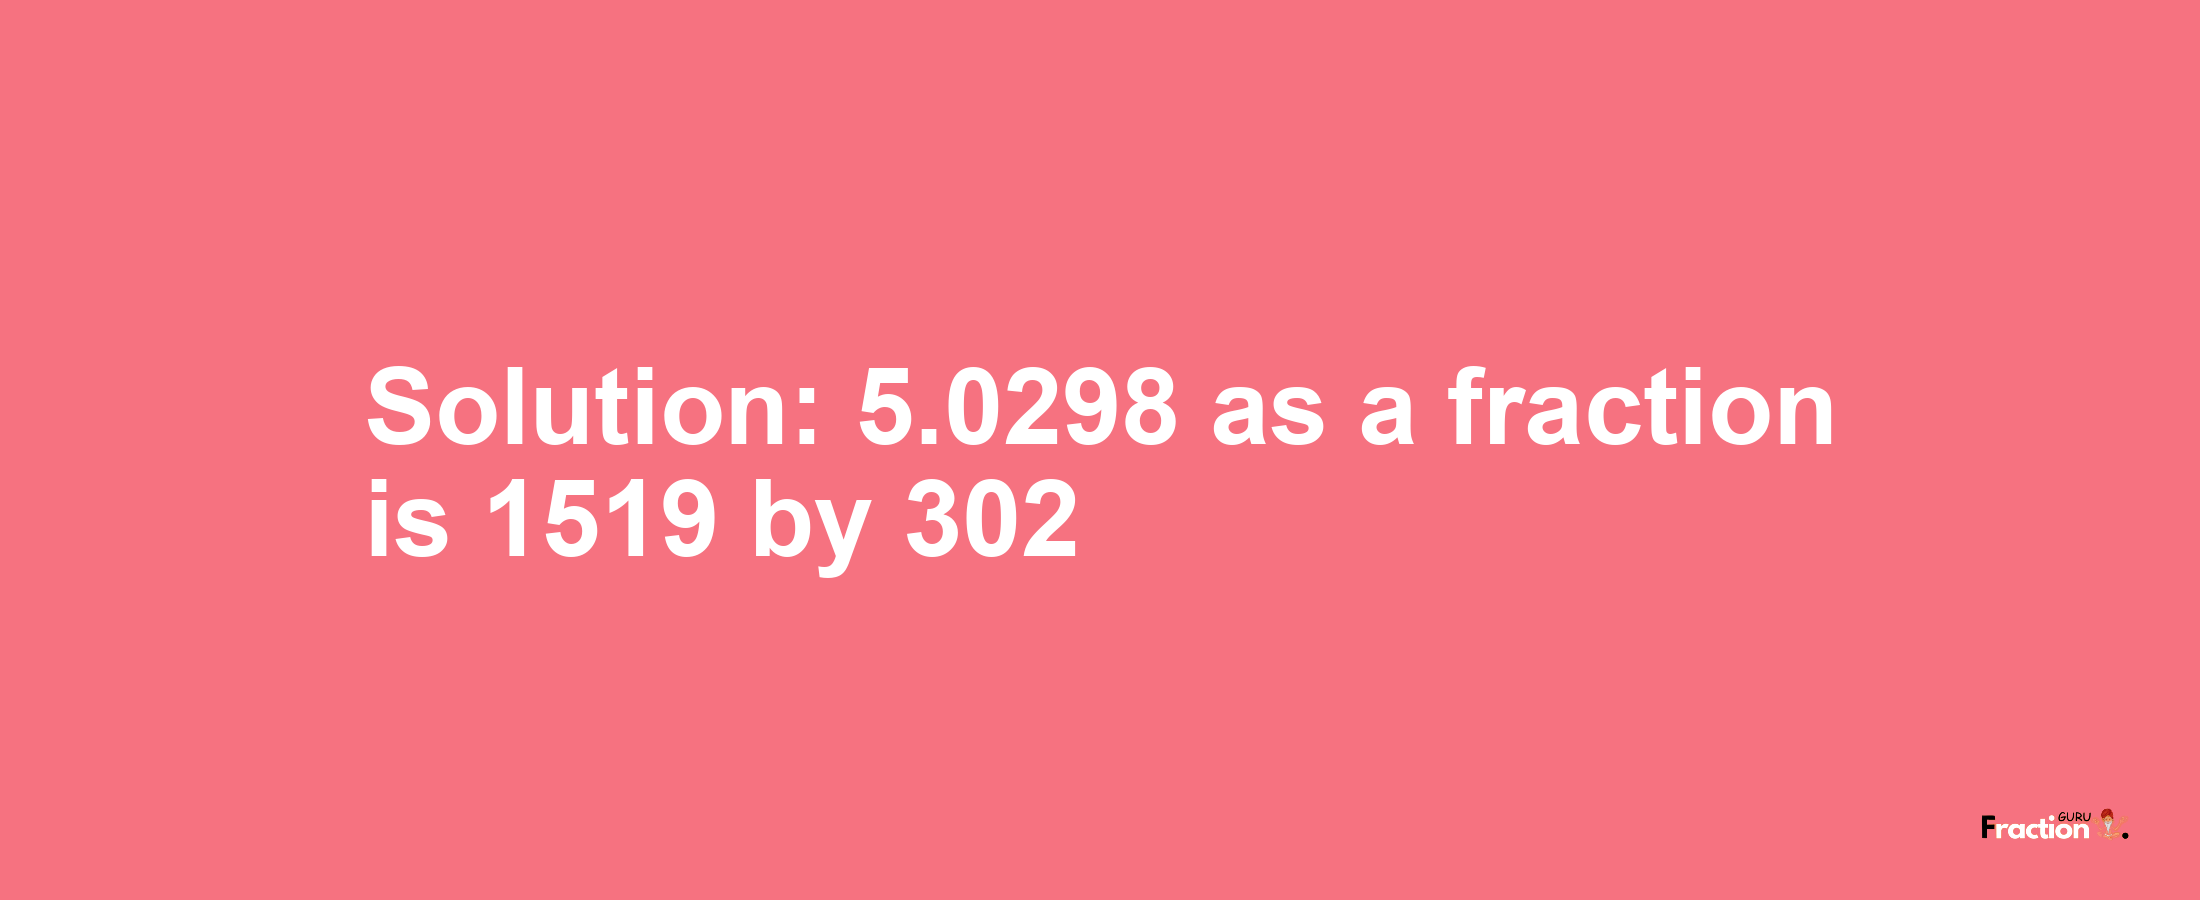 Solution:5.0298 as a fraction is 1519/302